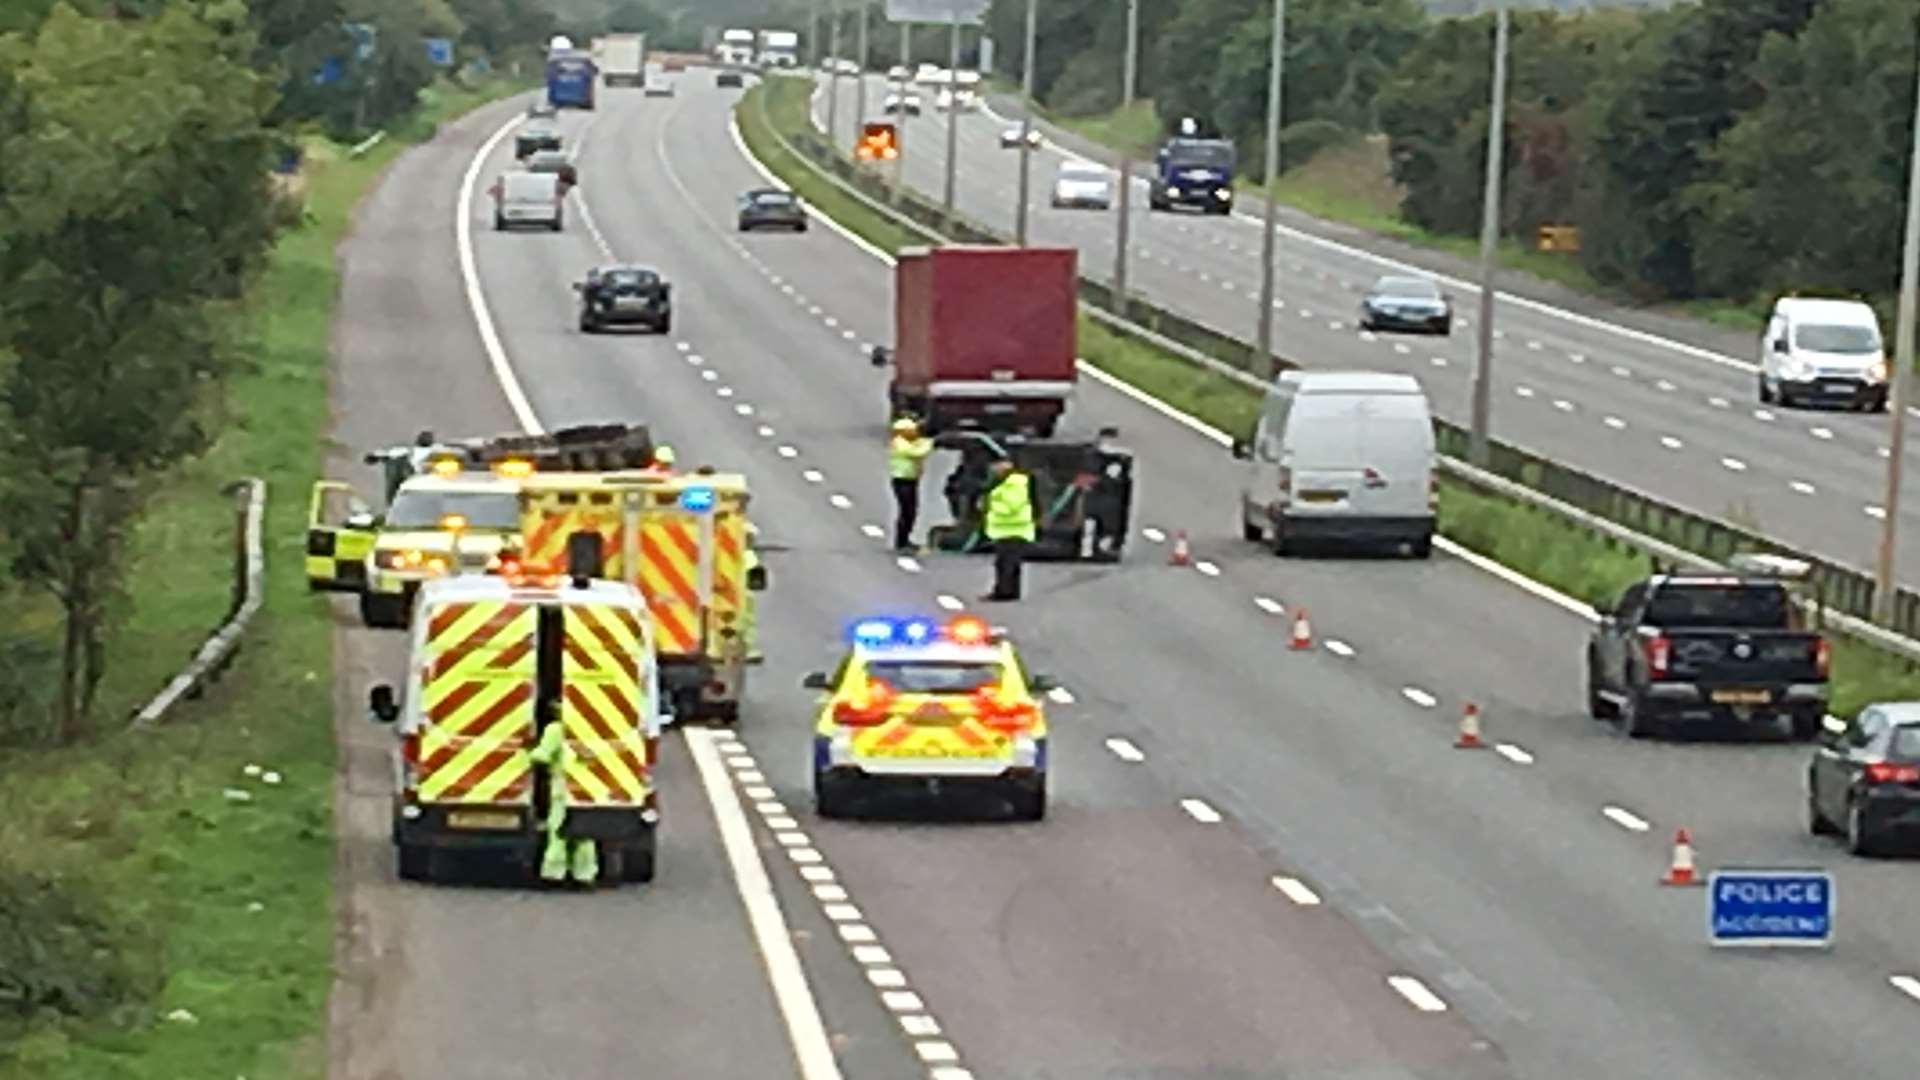 A vehicle overturned on the Londonbound M20 carriageway at Hythe